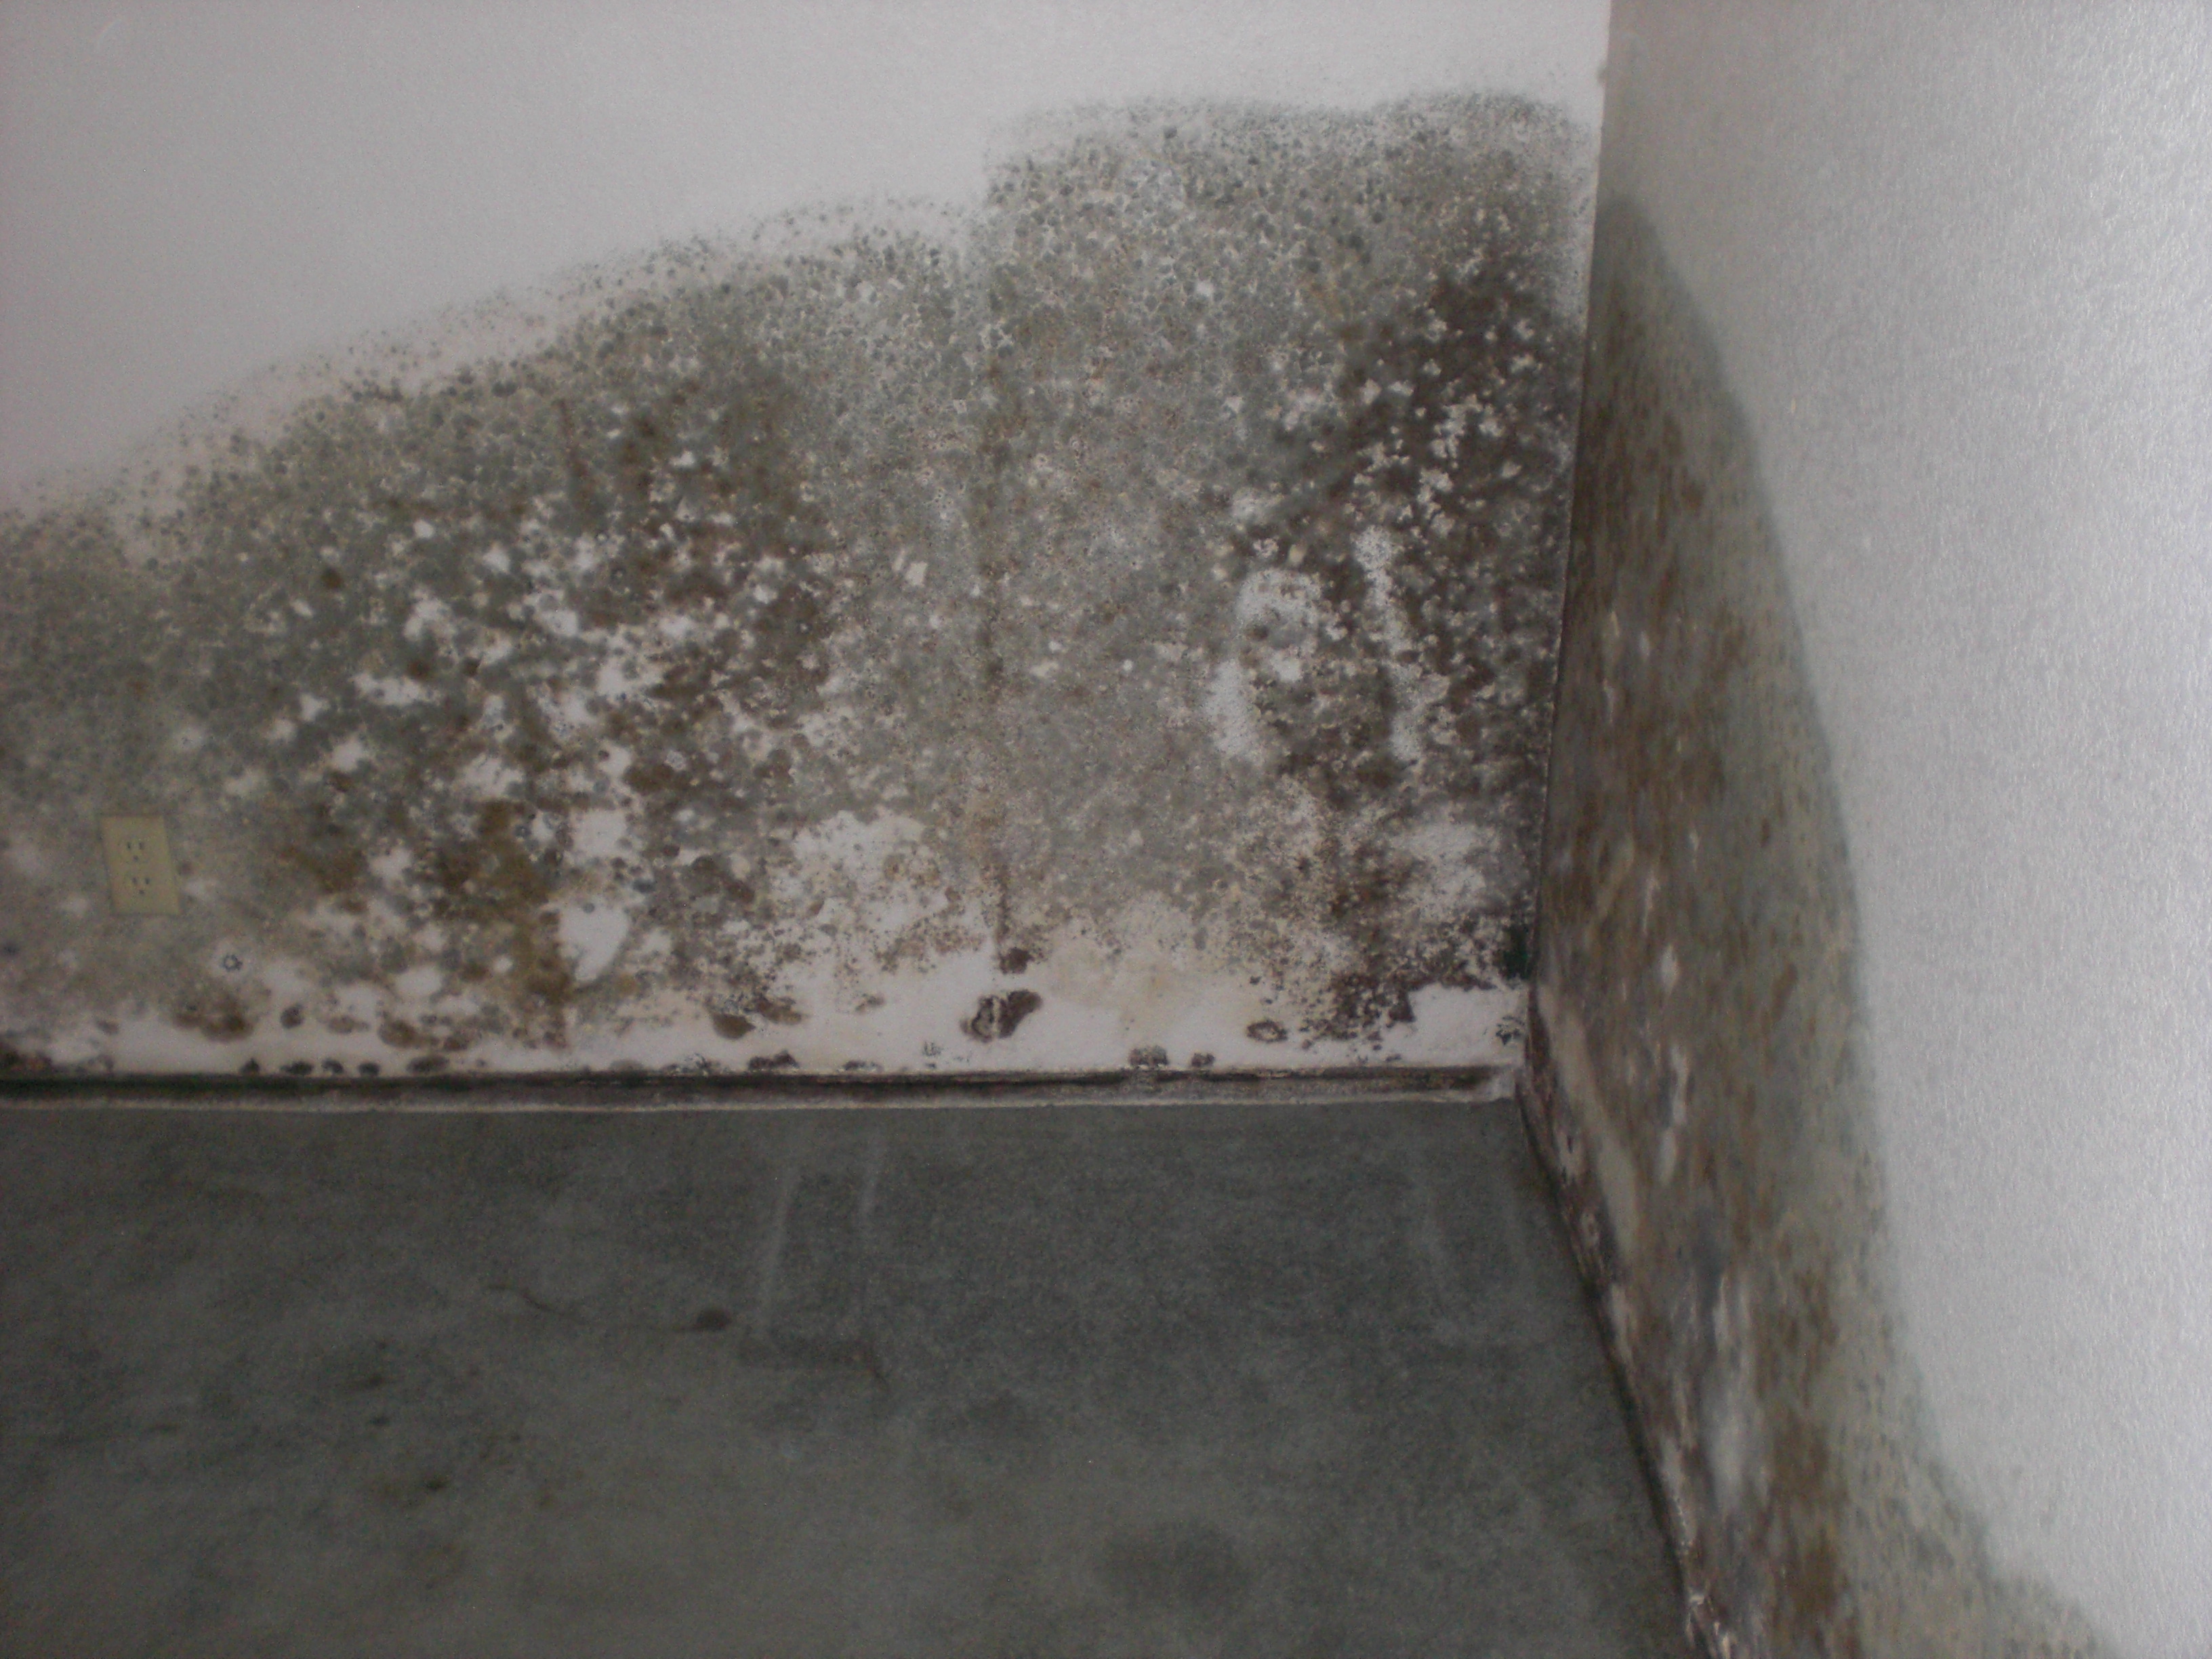 Removing the Smell of Mold and Mildew in the Basement